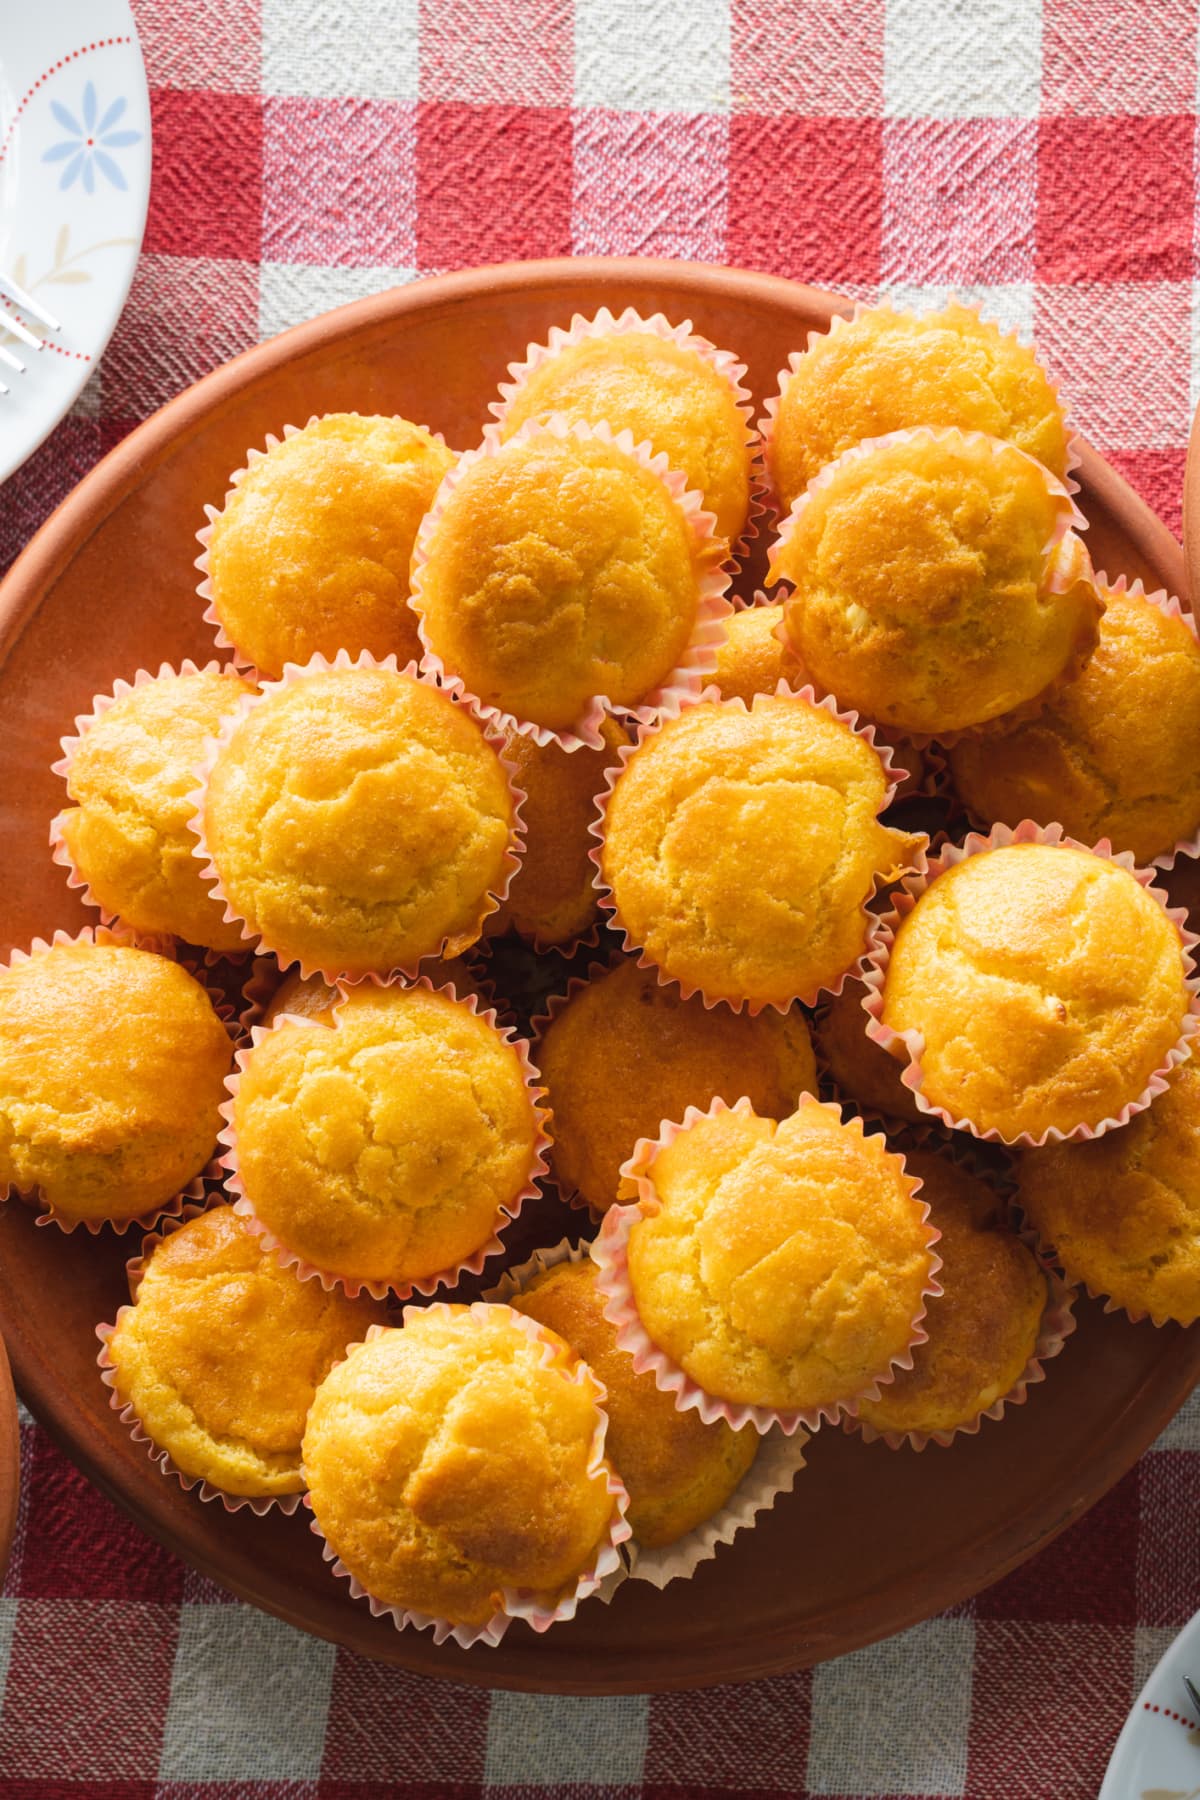 corn pone muffins in a plate on the table fresh baked ready to eat organic homemade food concept vegan or vegetarian traditional meal top view